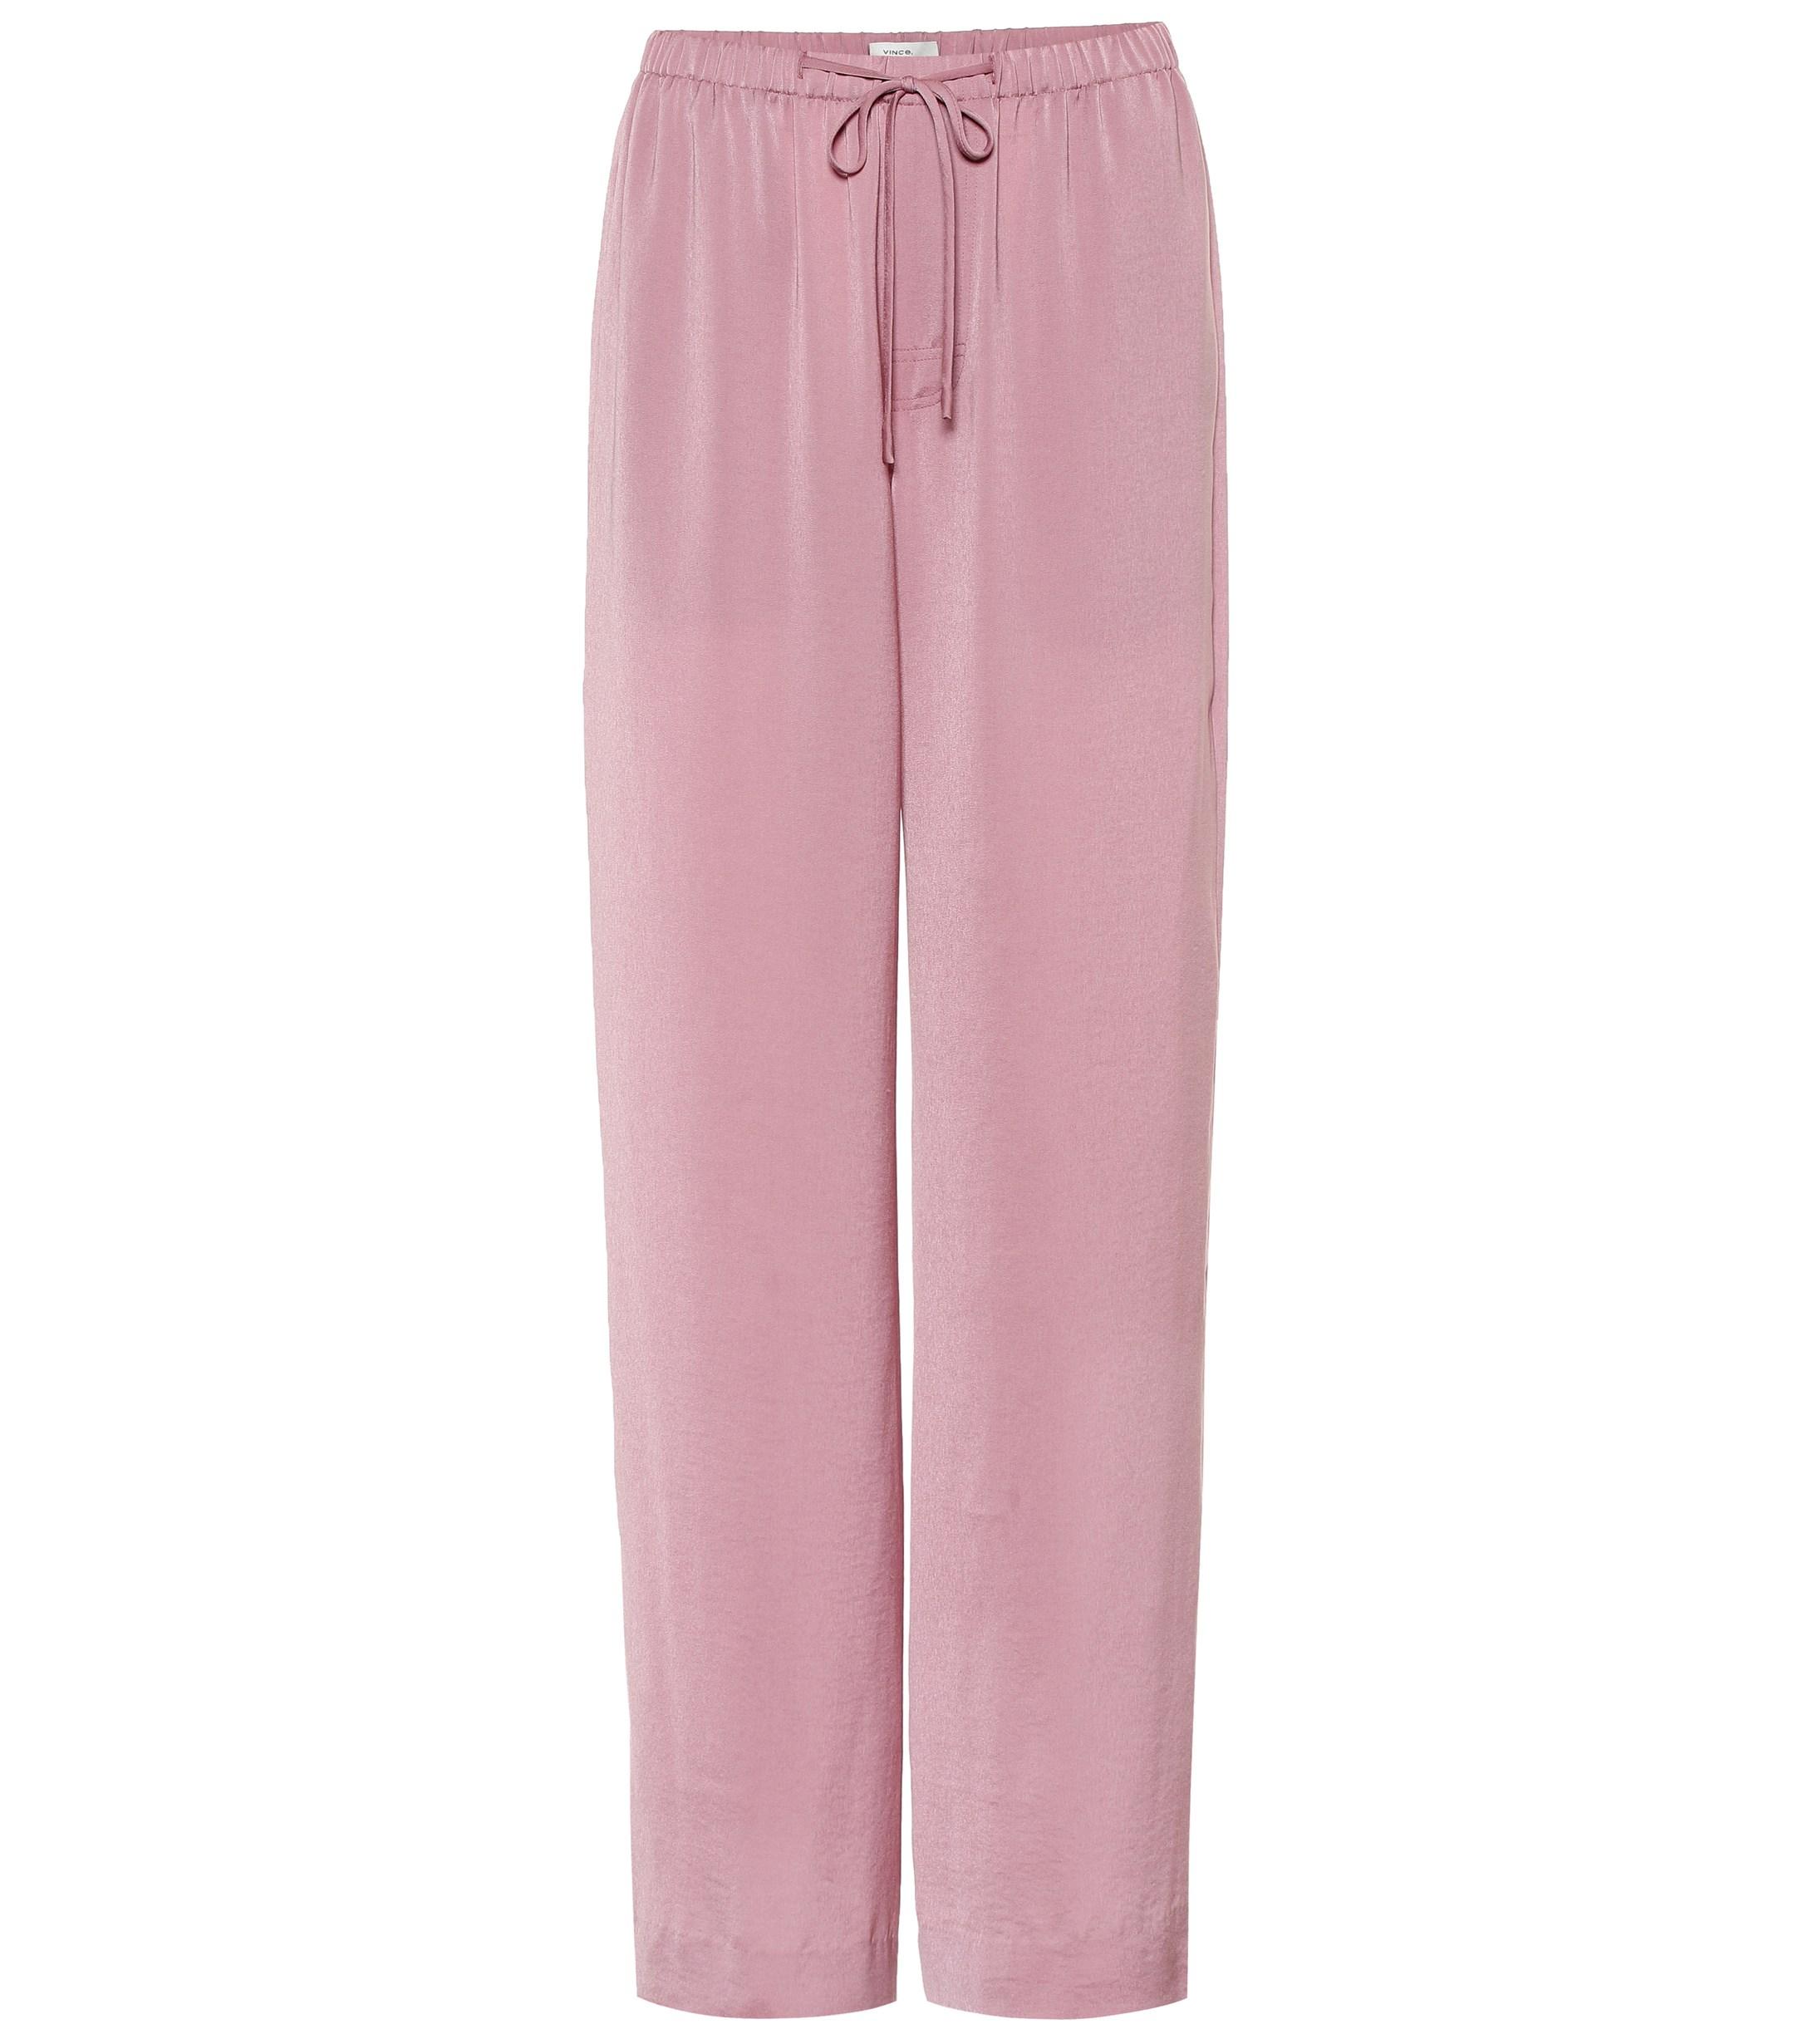 Vince Satin Pajama Pants in Pink - Lyst